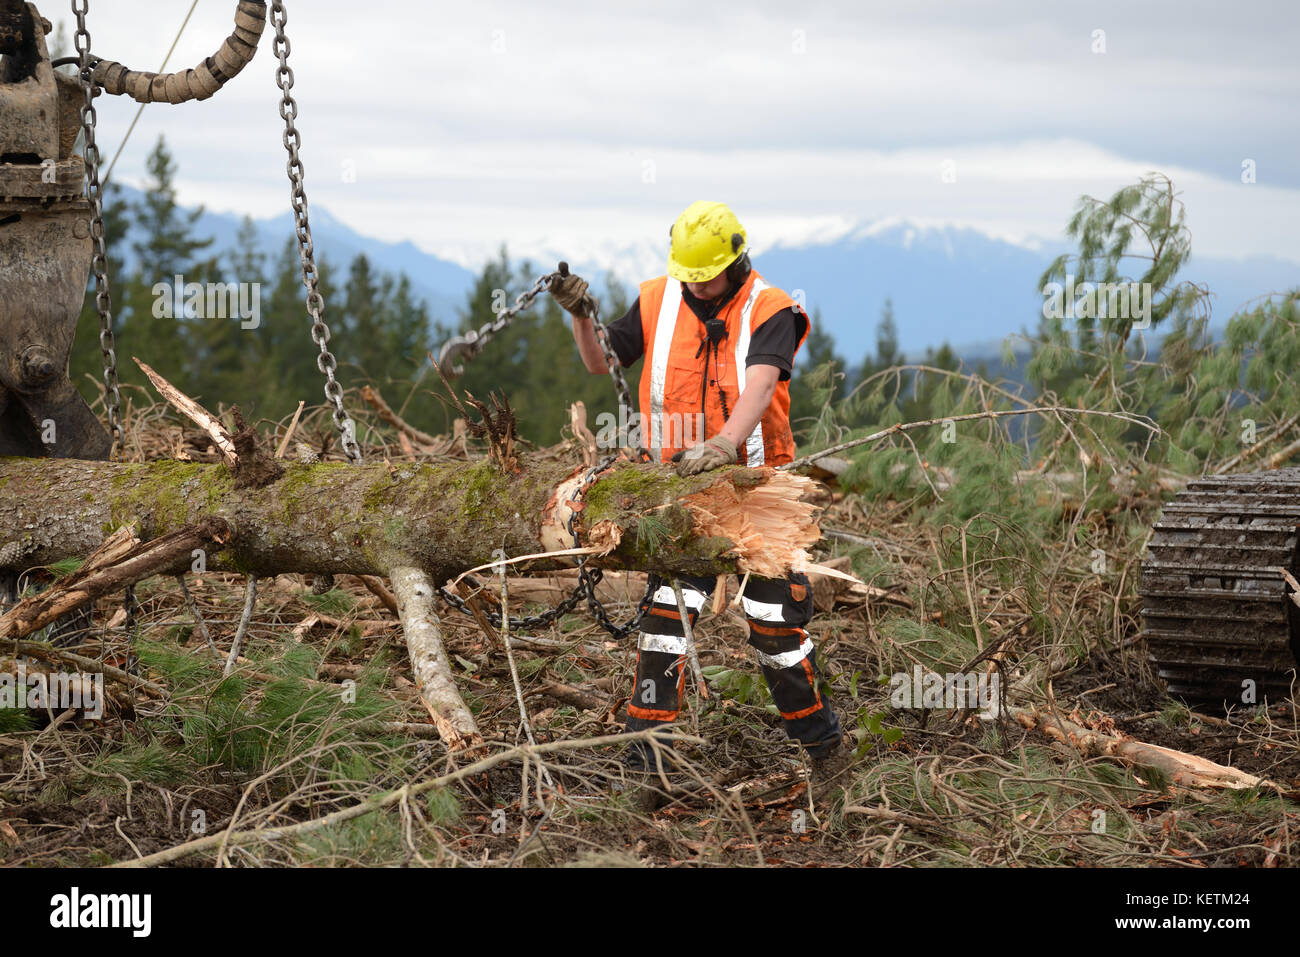 KUMARA, NEW ZEALAND, SEPTEMBER 20, 2017: A forestry worker removes the chain from a log at a logging site near Kumara, West Coast, New Zealand Stock Photo